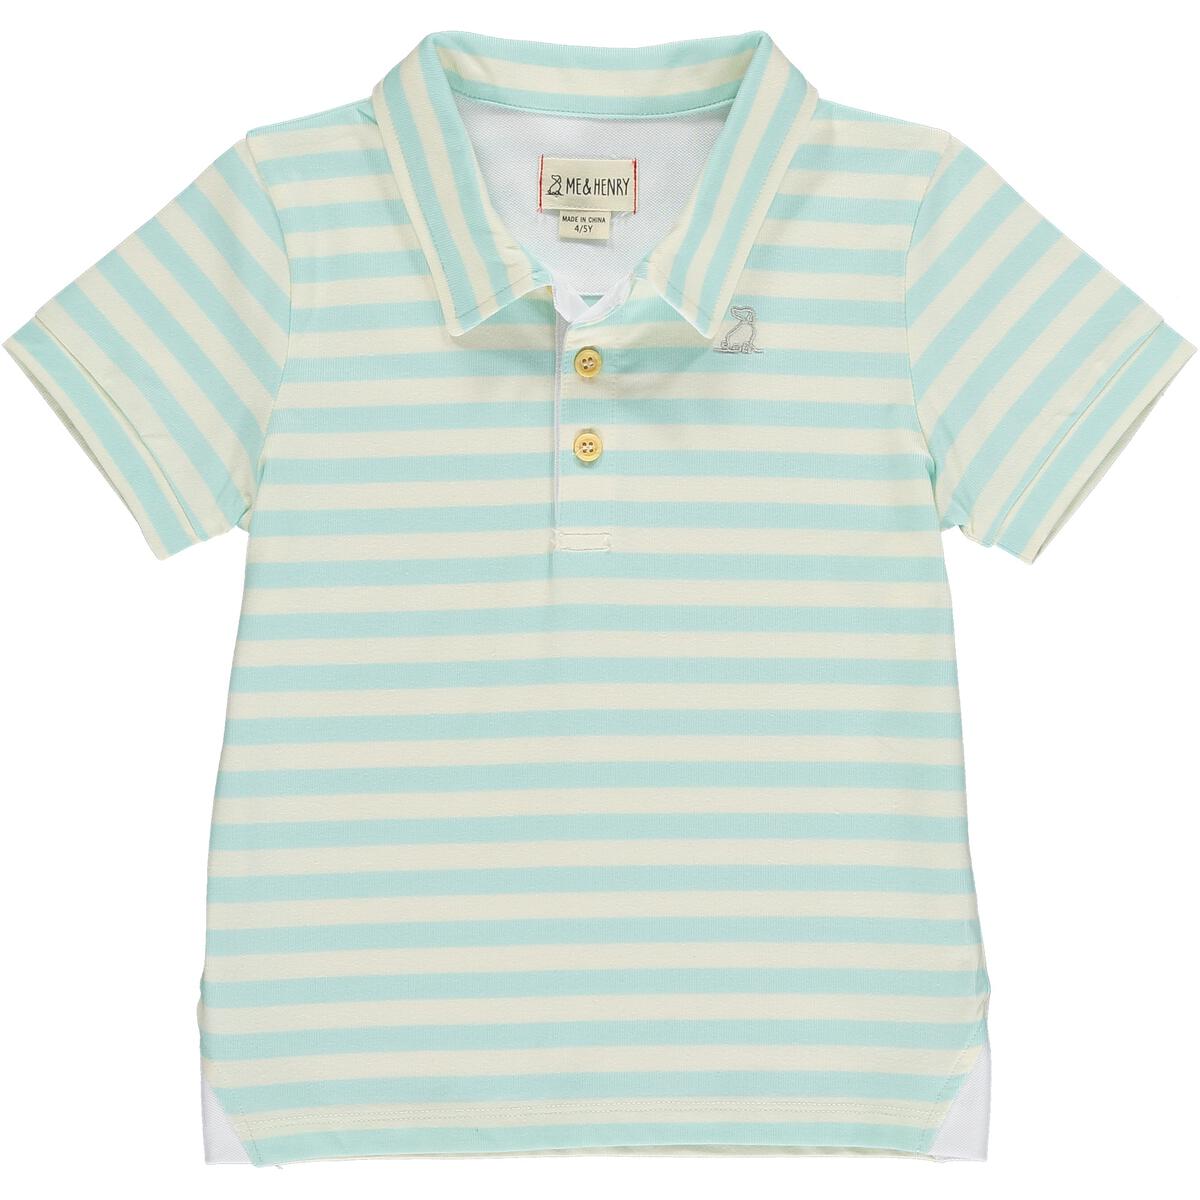 Starboard Polo- Toddler